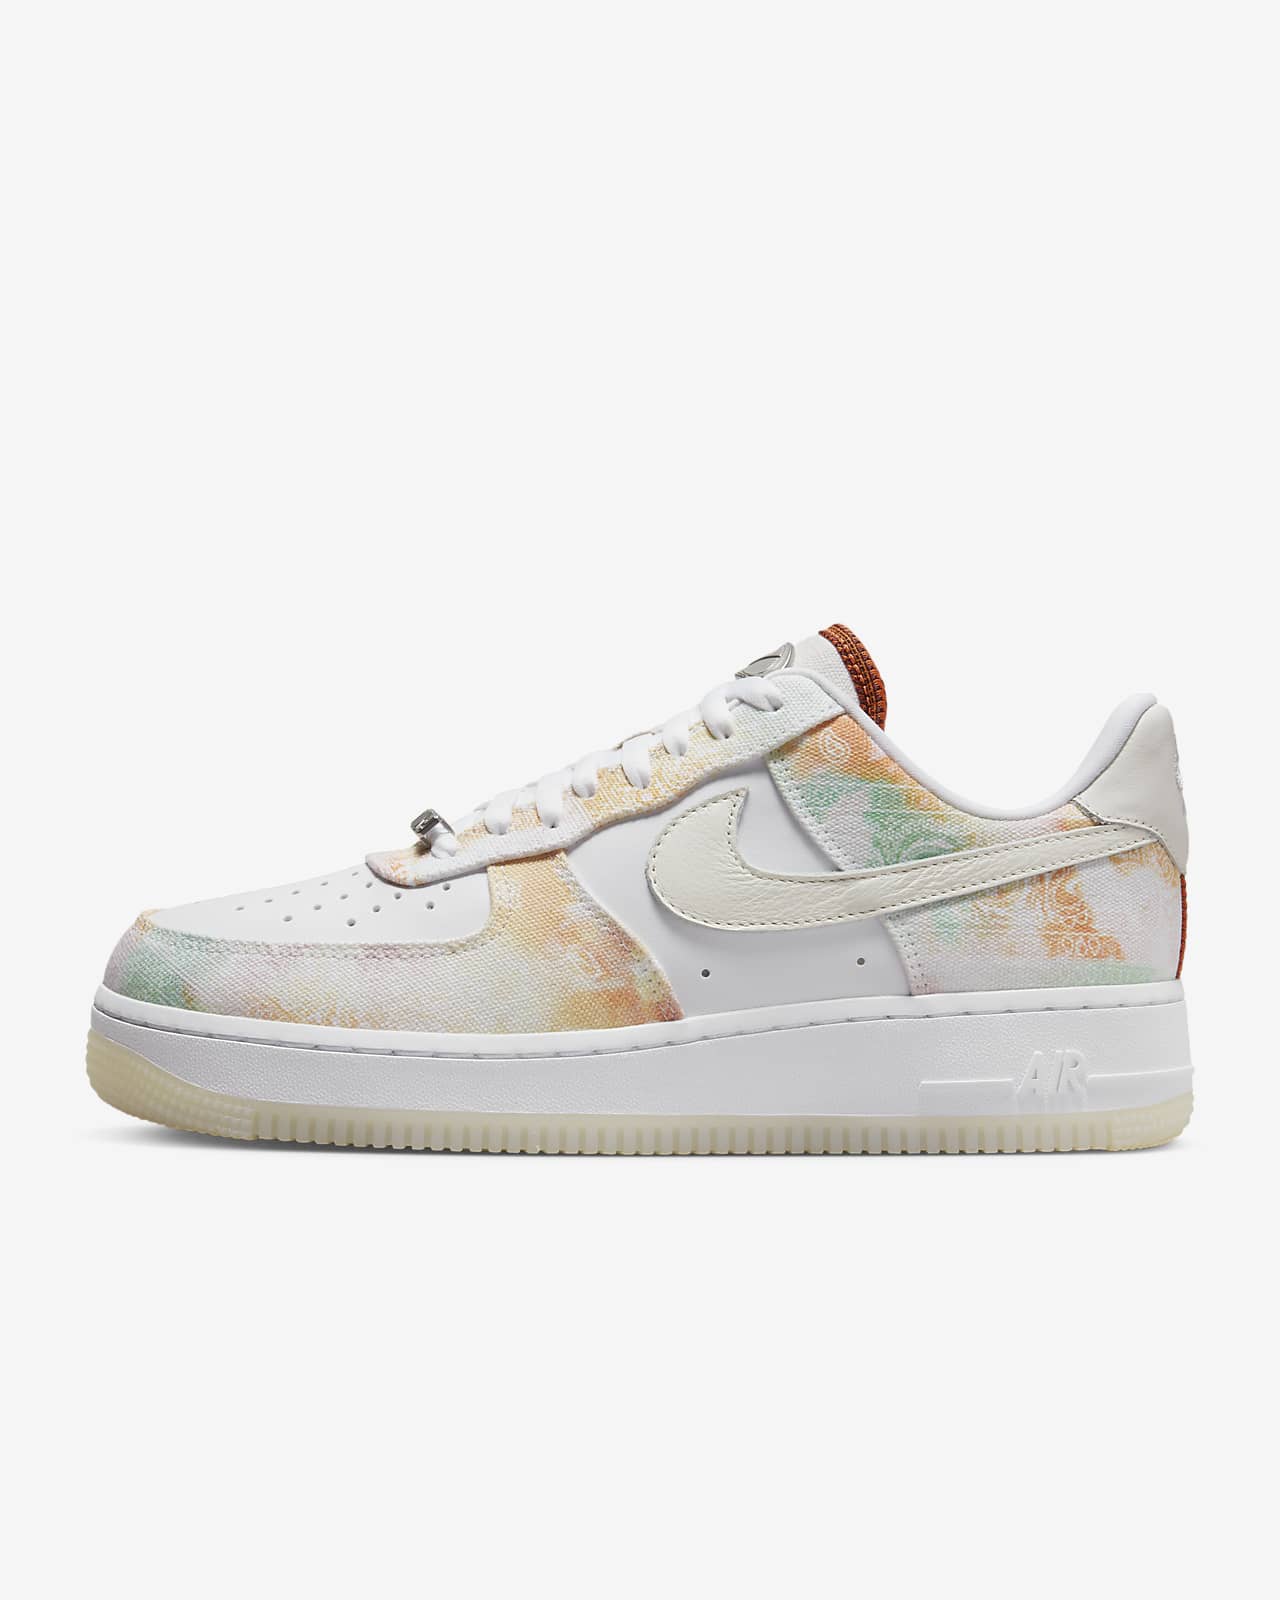 Nike Air Force 1 '07 Lx Women'S Shoes. Nike Vn